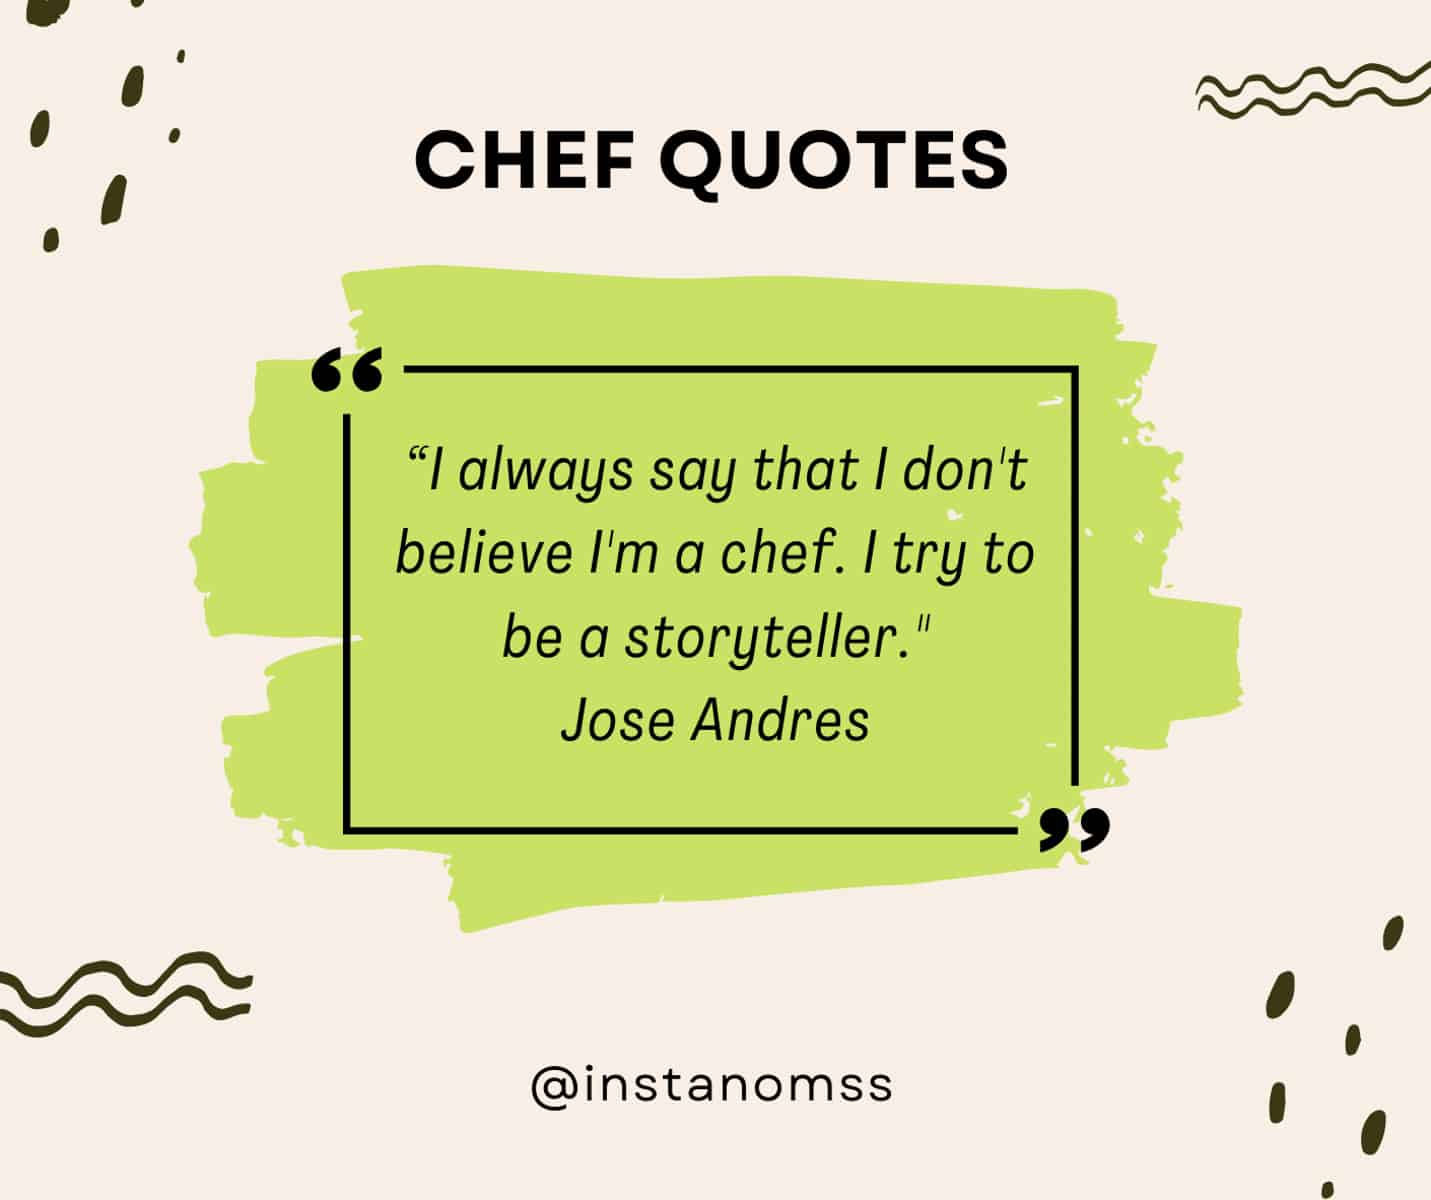 “I always say that I don't believe I'm a chef. I try to be a storyteller." Jose Andres